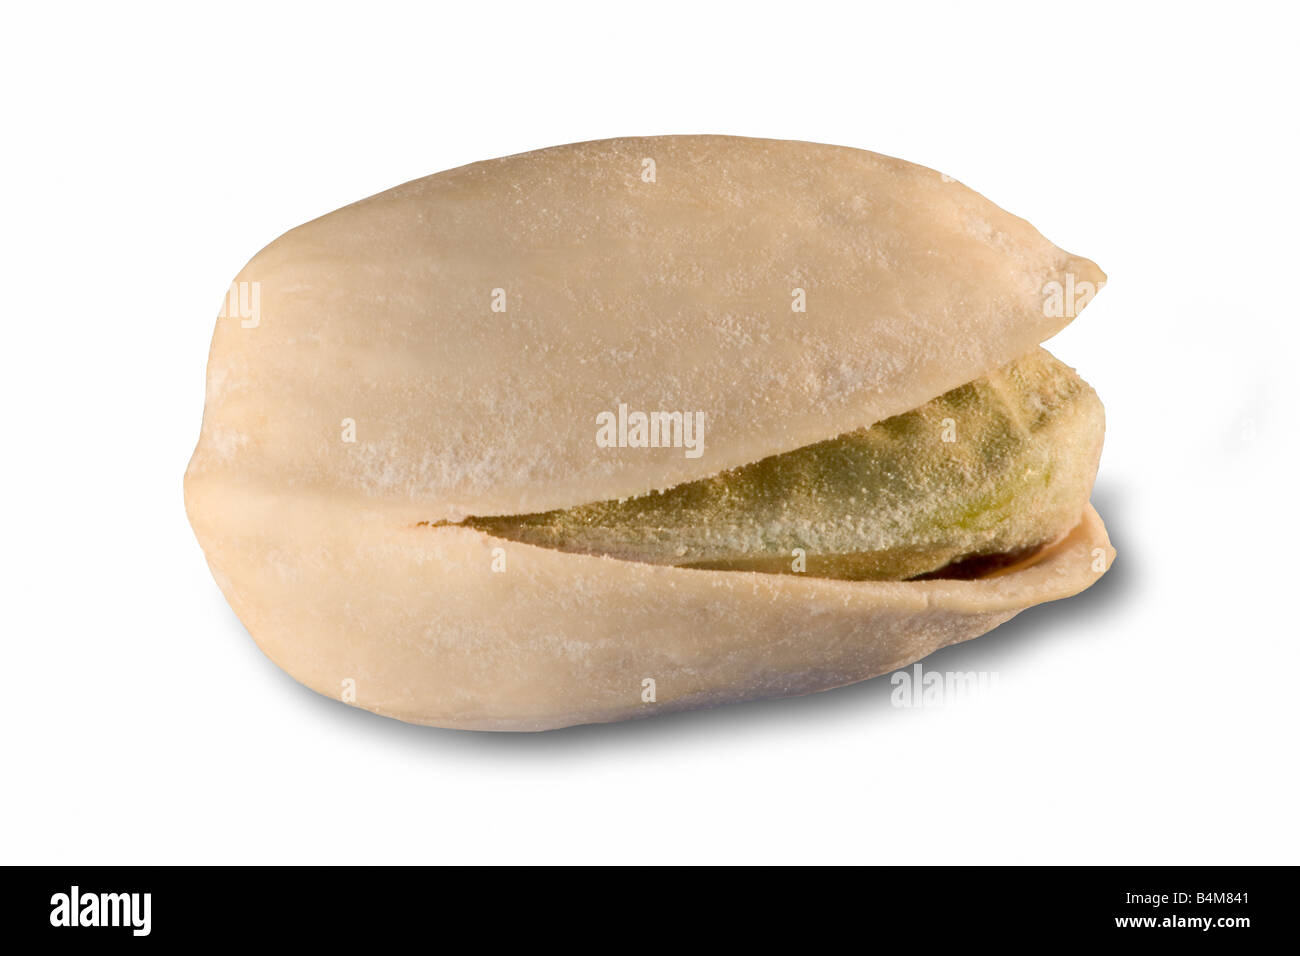 A single salted pistachio nut close up A path is included Stock Photo